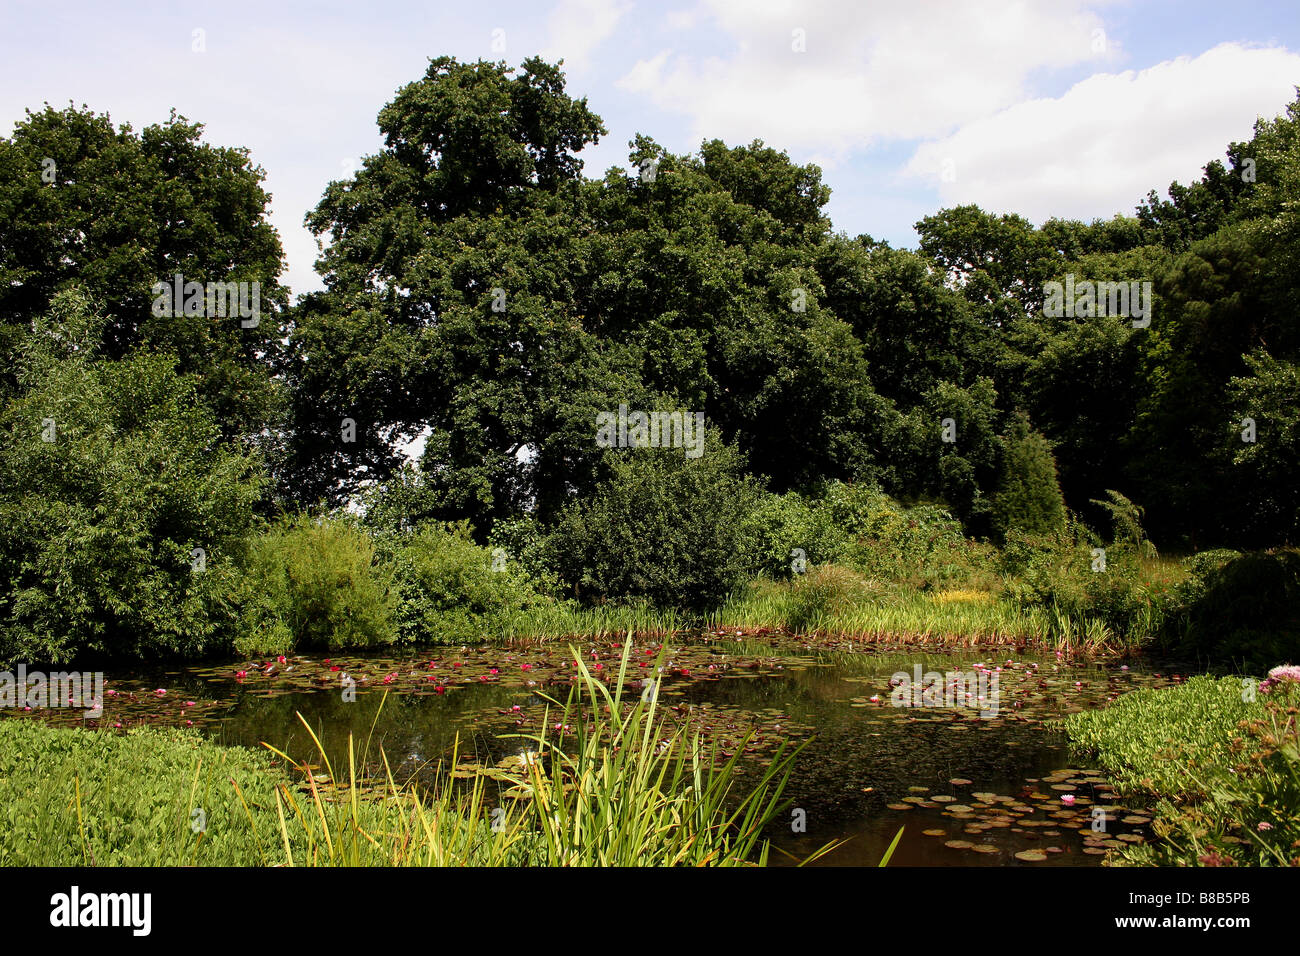 A FOREST WILDLIFE POND WITH WATER LILY PADS IN THE ENGLISH COUNTRYSIDE. Stock Photo